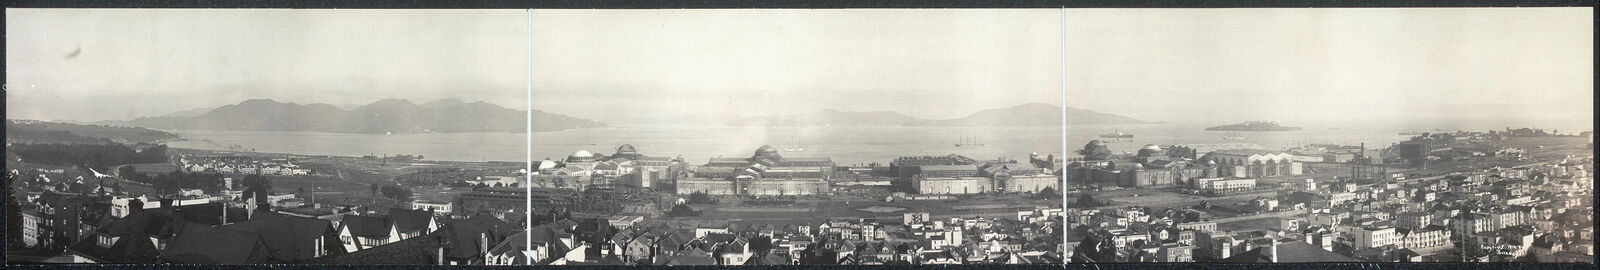 Photo:1914 Panoramic: Exhibition grounds at San Francisco,Feb. 20,1914